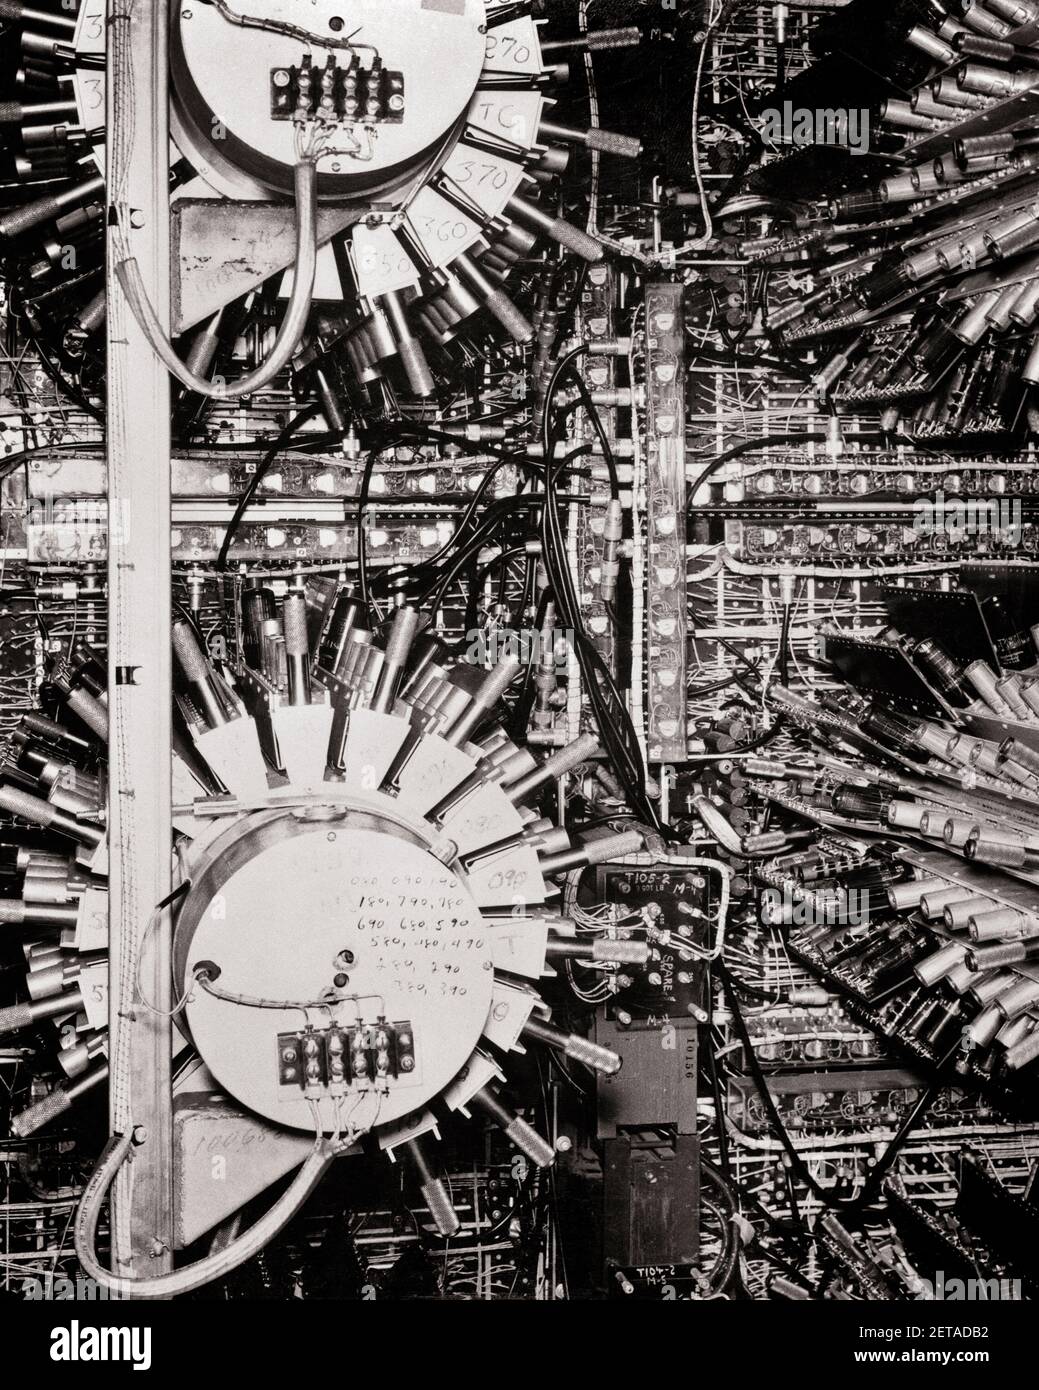 1950s VIEW INSIDE THE UNIVAC COMPUTER TWO MEMORY CELLS OF UNIVERSAL AUTOMATIC COMPUTER  - o29 HAR001 HARS COMPLEX AI ARTIFICIAL INTELLIGENCE CELLS CREATIVITY DIGITAL ELECTRONIC PRECISION SOLUTIONS UNIVAC UNIVERSAL BLACK AND WHITE CIRCUITS COMPUTING HAR001 OLD FASHIONED PARTS Stock Photo